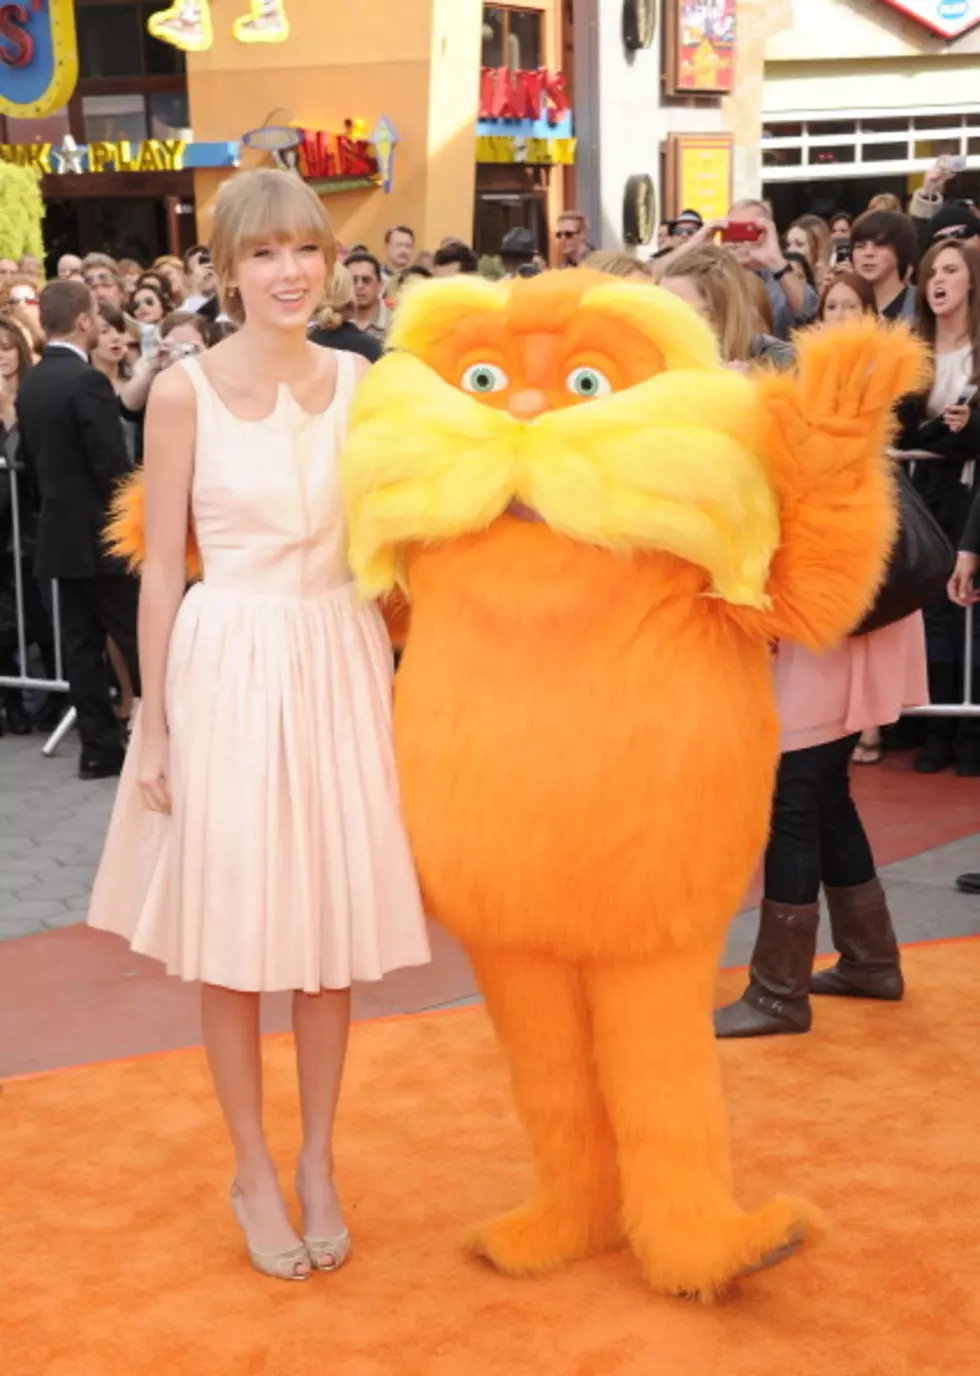 Breitbart TV-The Lorax Angry, Not A Happy Children’s Movie